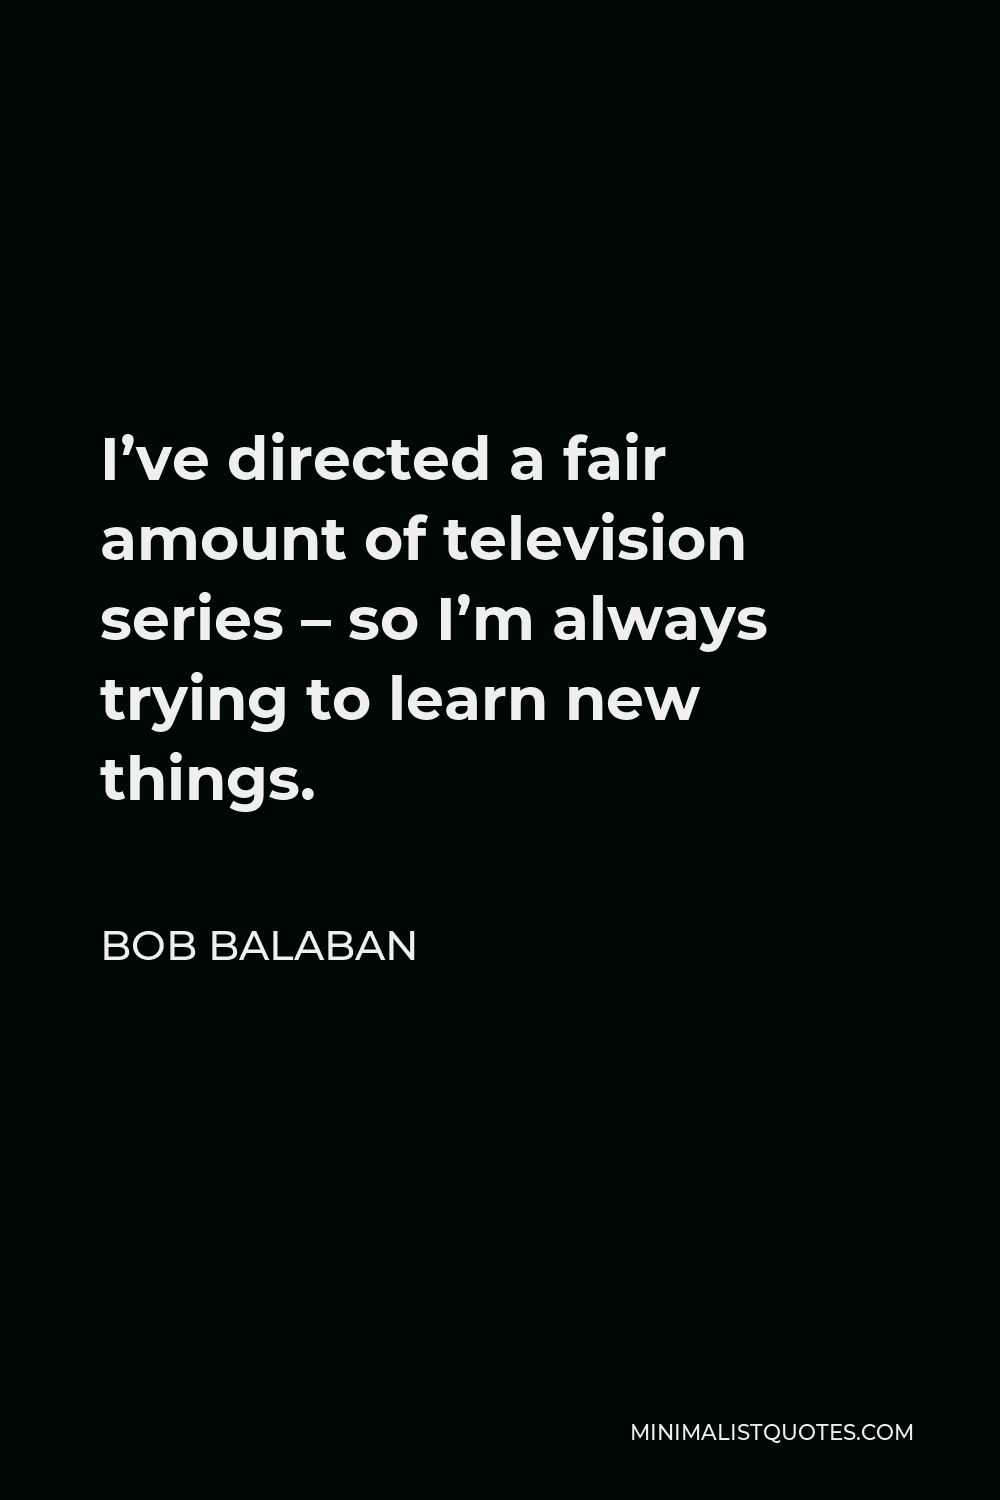 Bob Balaban Quote - I’ve directed a fair amount of television series – so I’m always trying to learn new things.